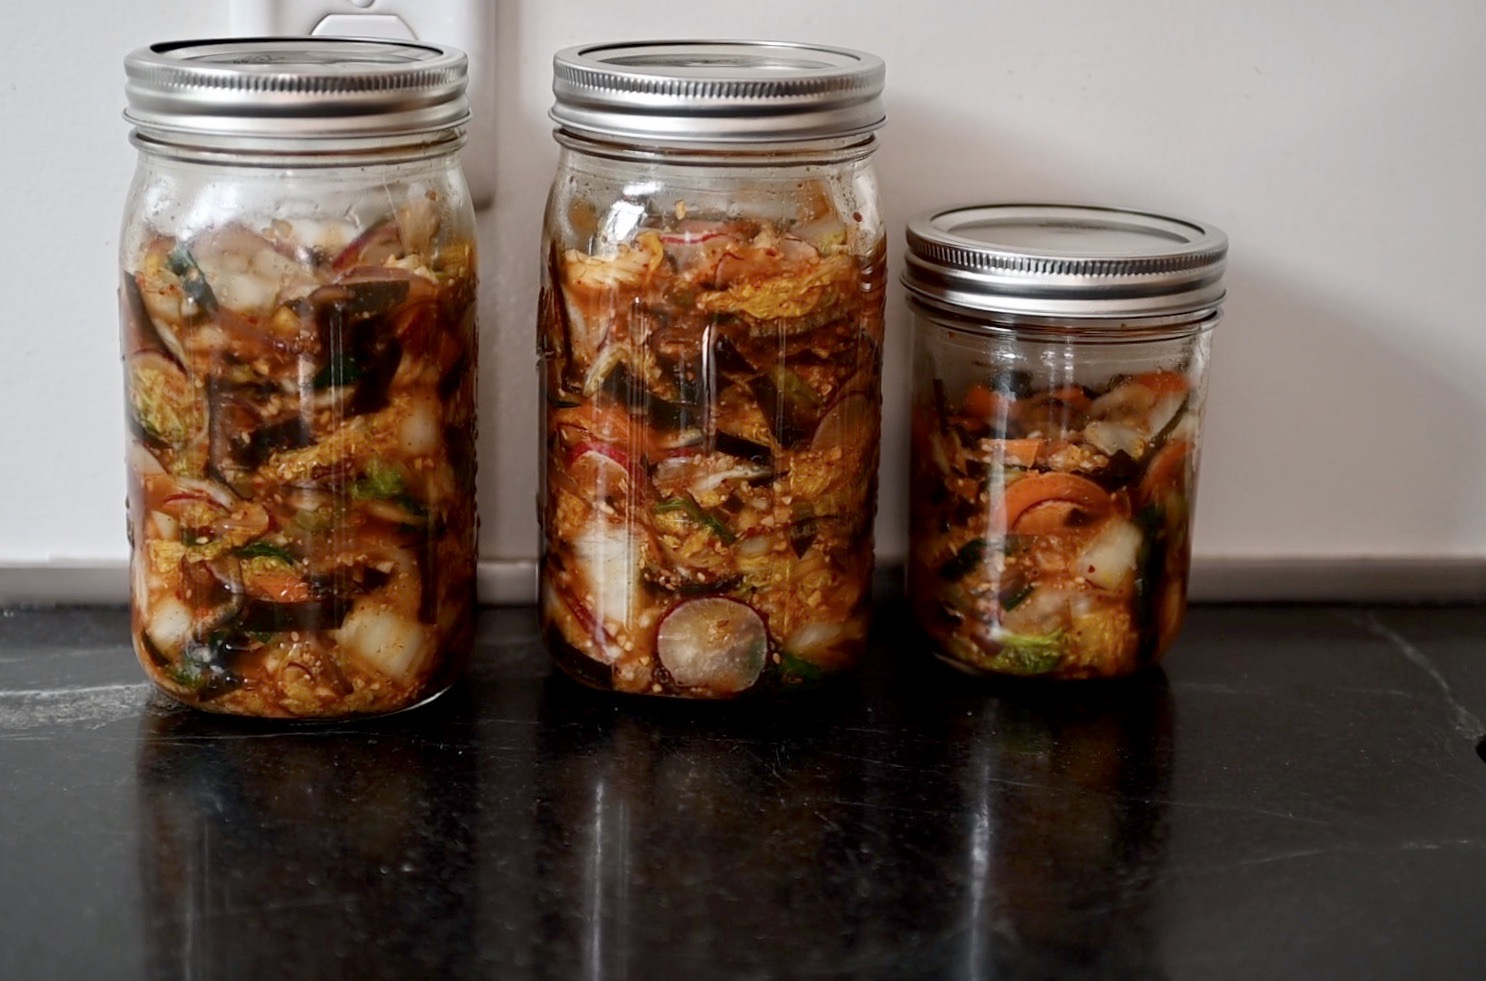 leave the jars at room temperature to ferment